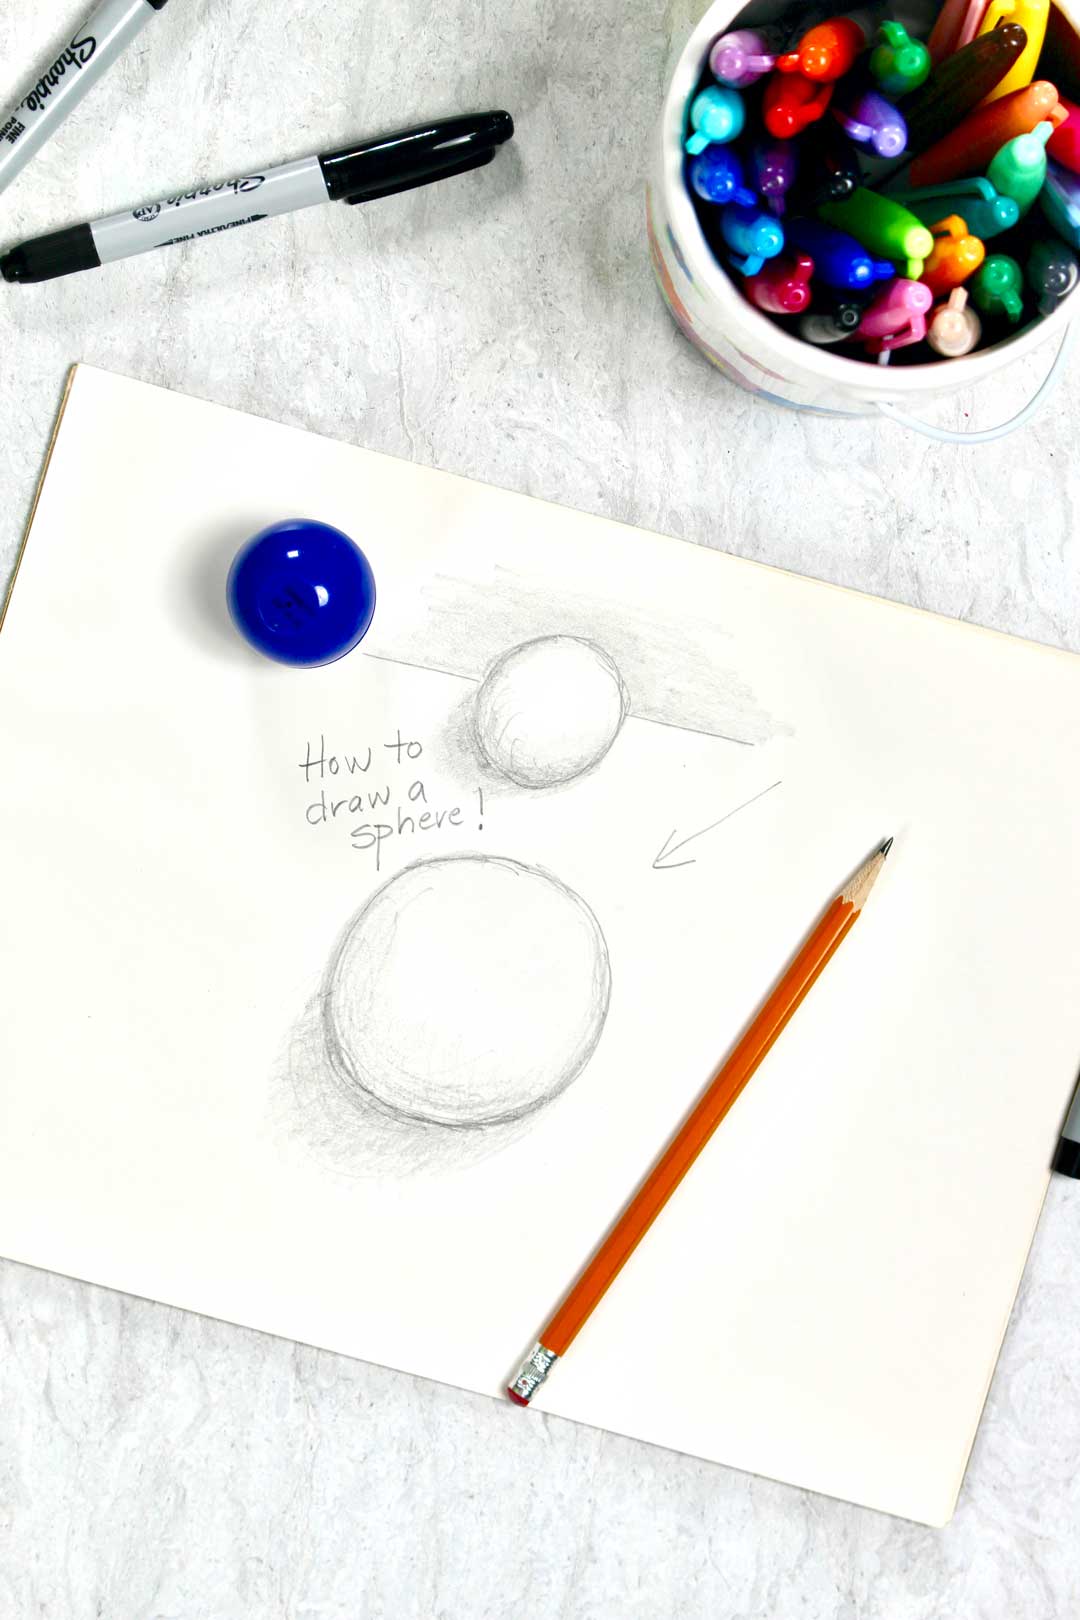 A tutorial pencil drawing of two 3-D spheres, sitting near a pencil and jar of drawing utensils.